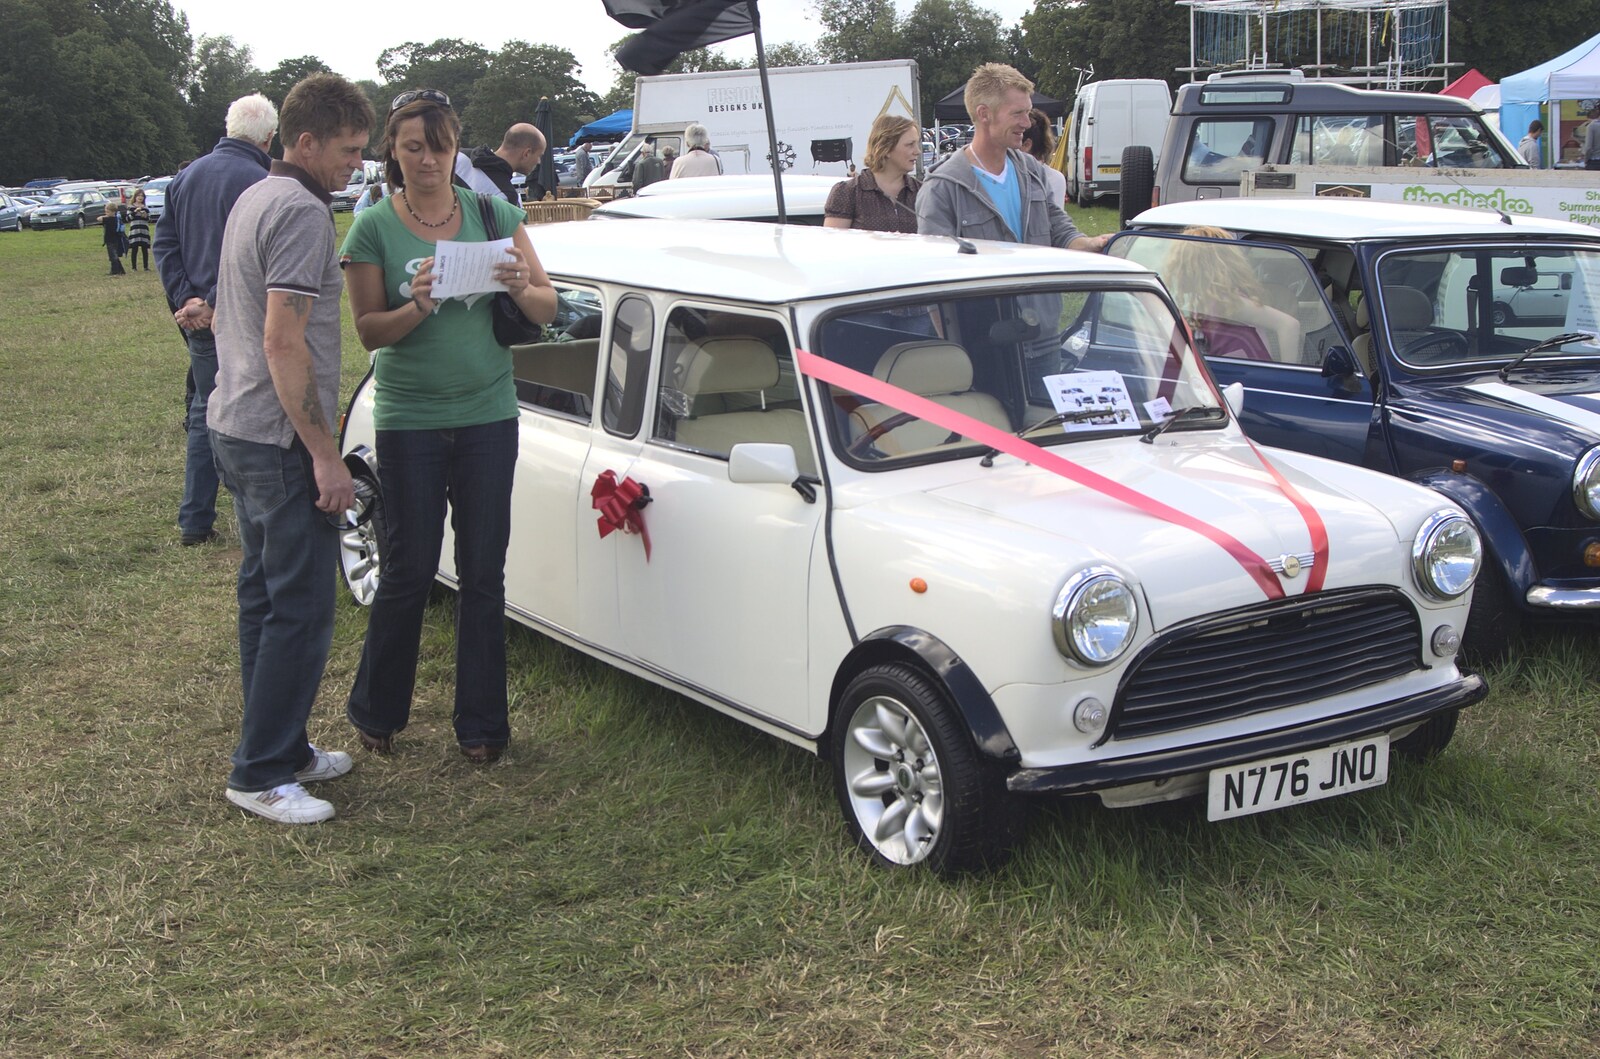 A stretched mini from The Eye Show, Palgrave, Suffolk - 30th August 2010